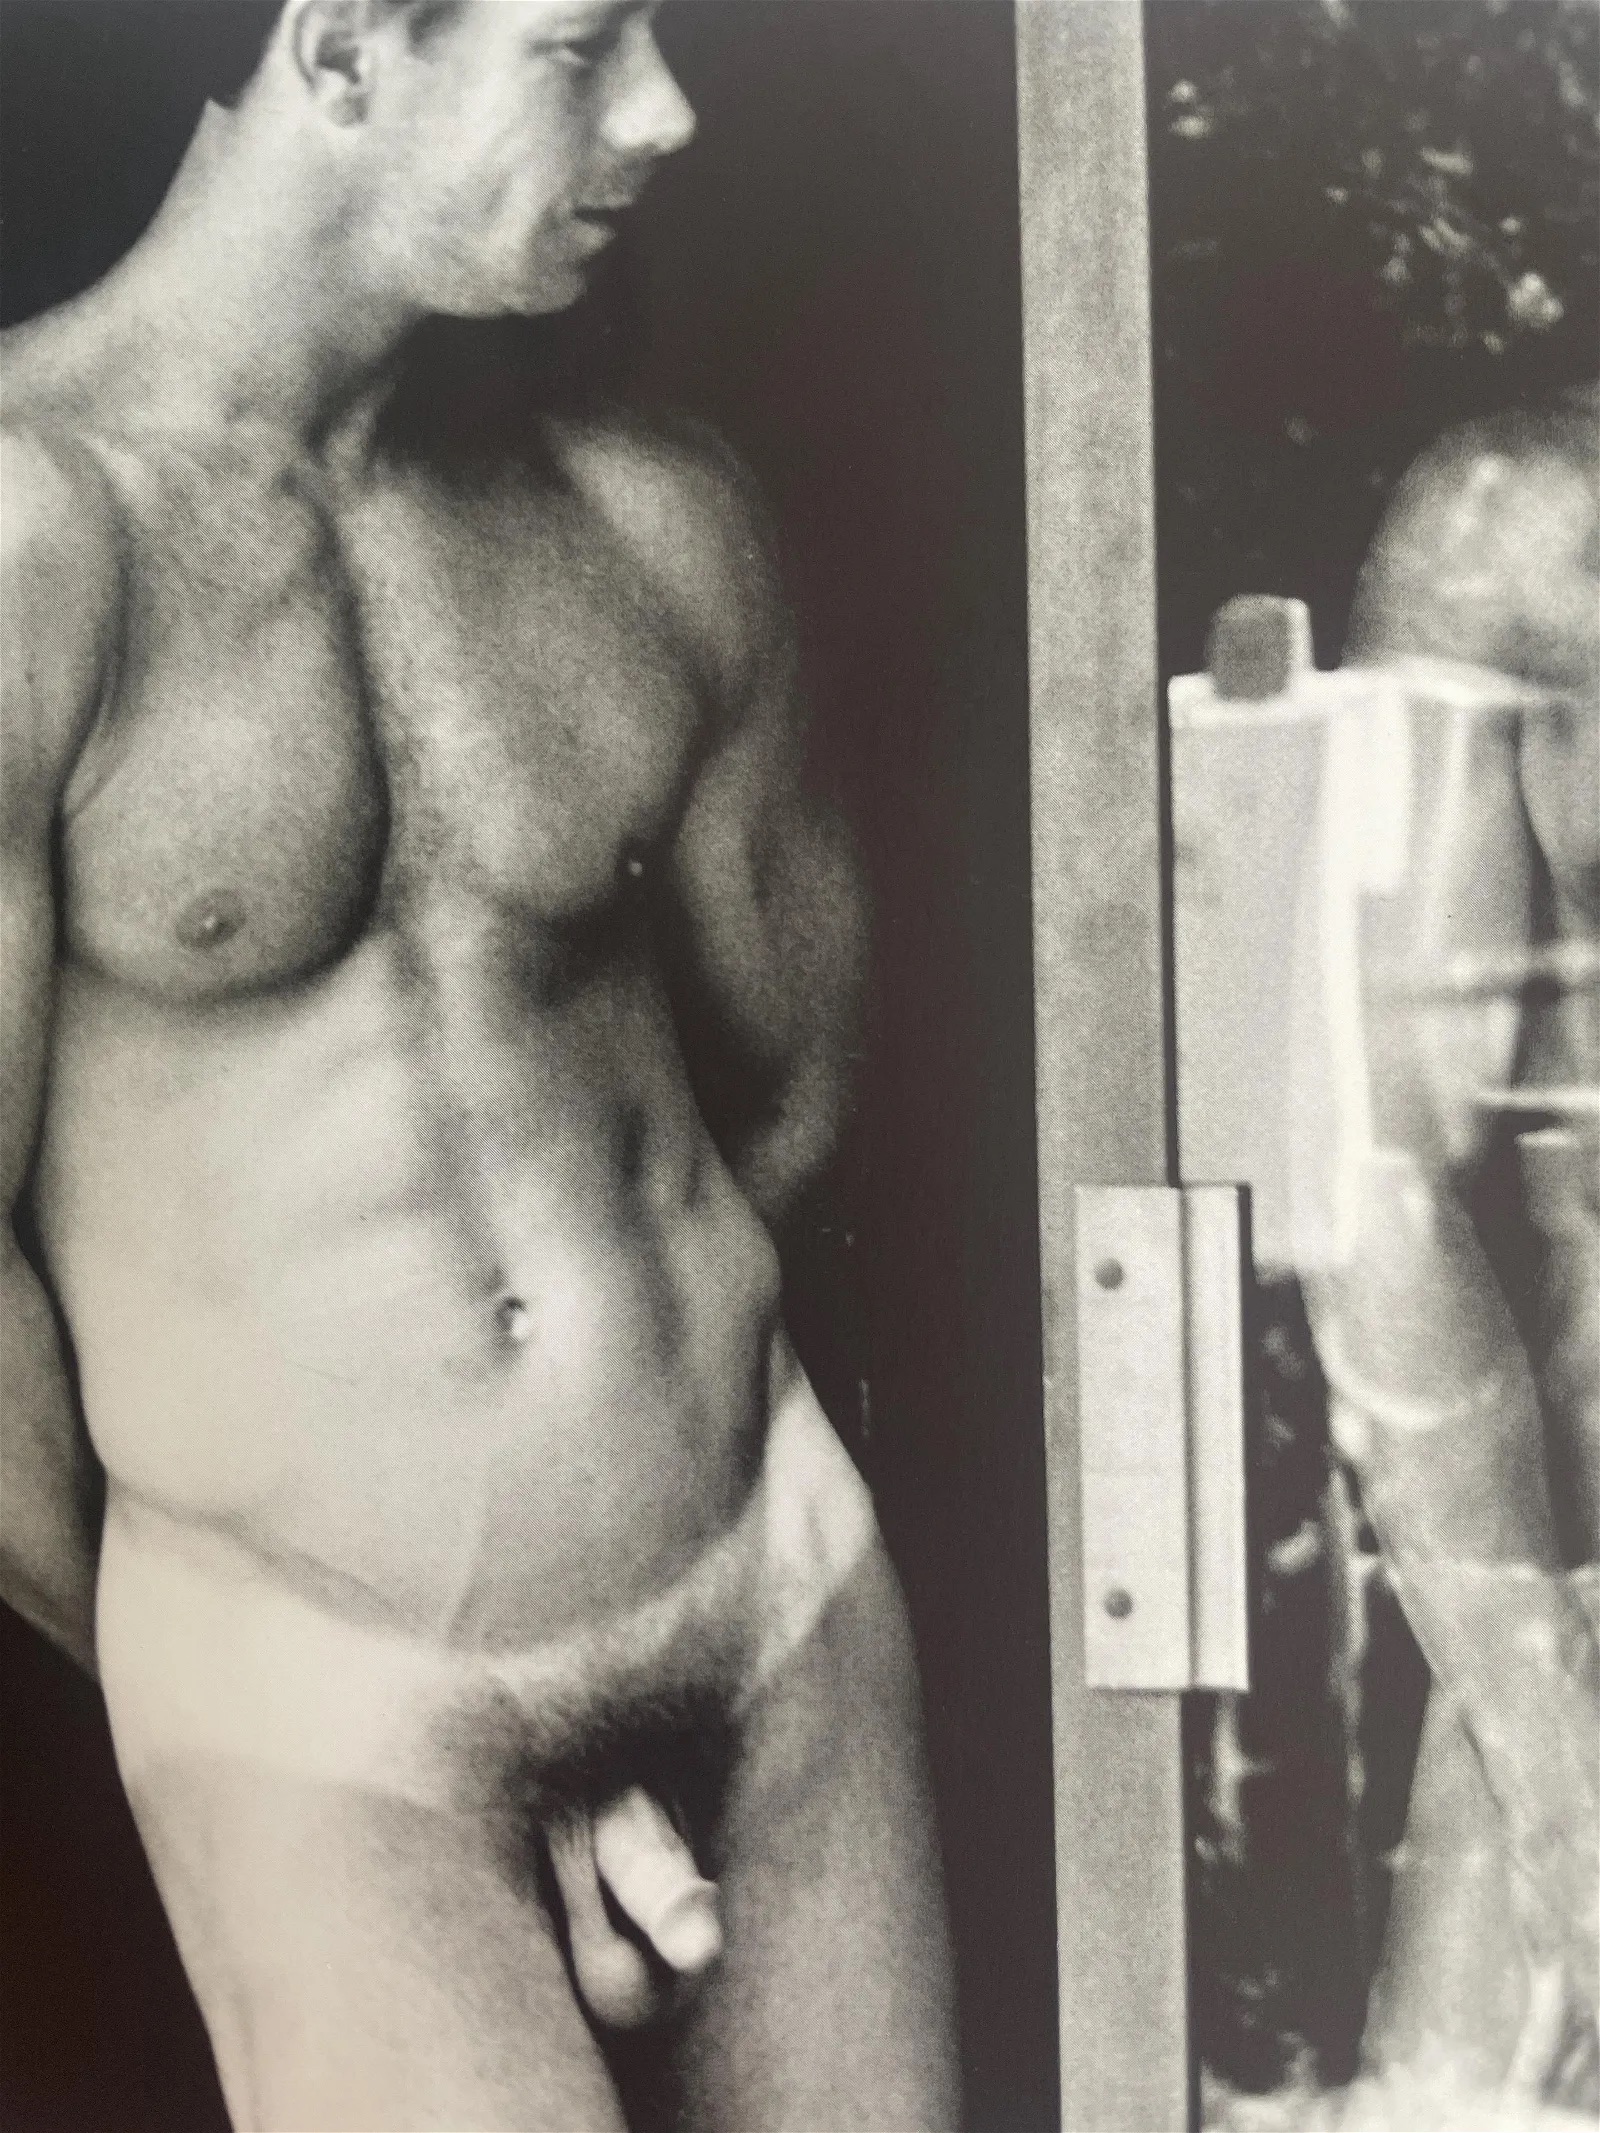 Tom Bianchi "Male Nude" Print - Image 4 of 6